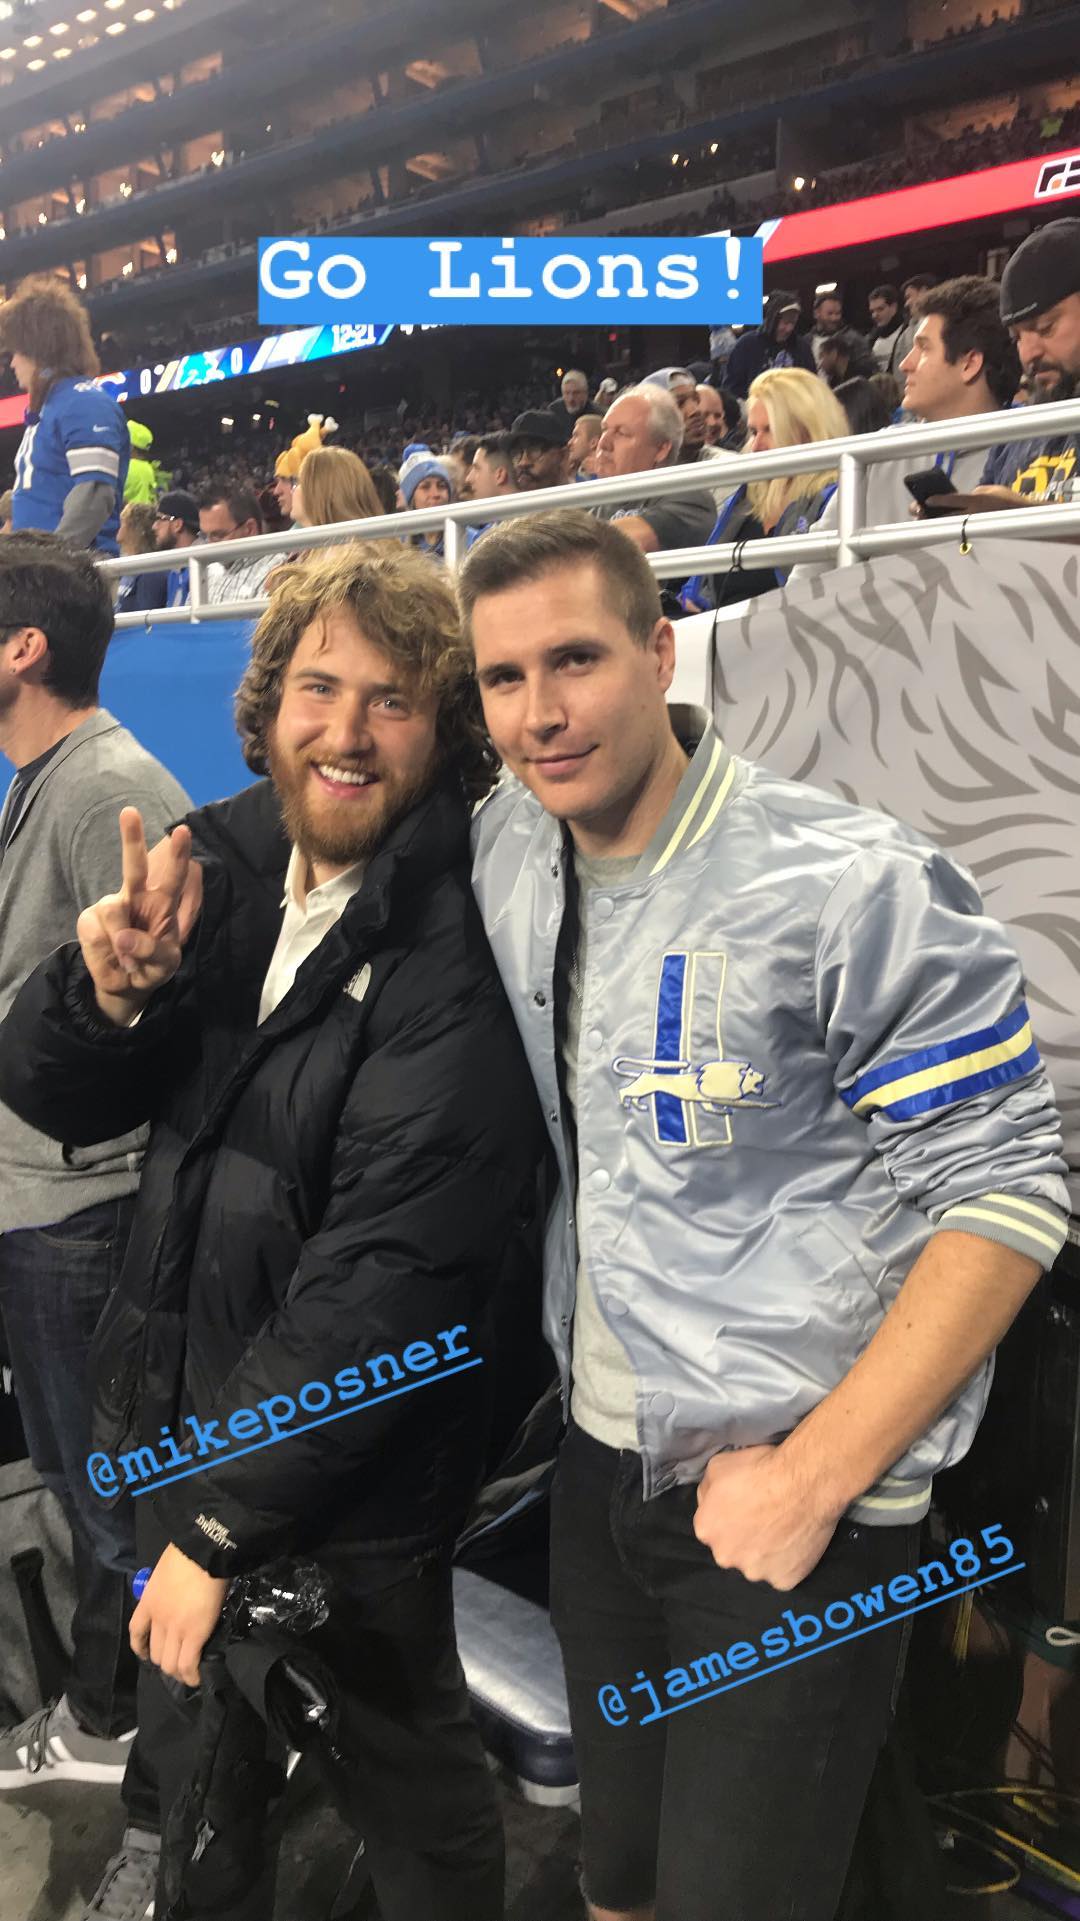 Mike Posner and band member James Bowen at Ford Field before performing the halftime show
Photo credit: Ryan Chisholm
